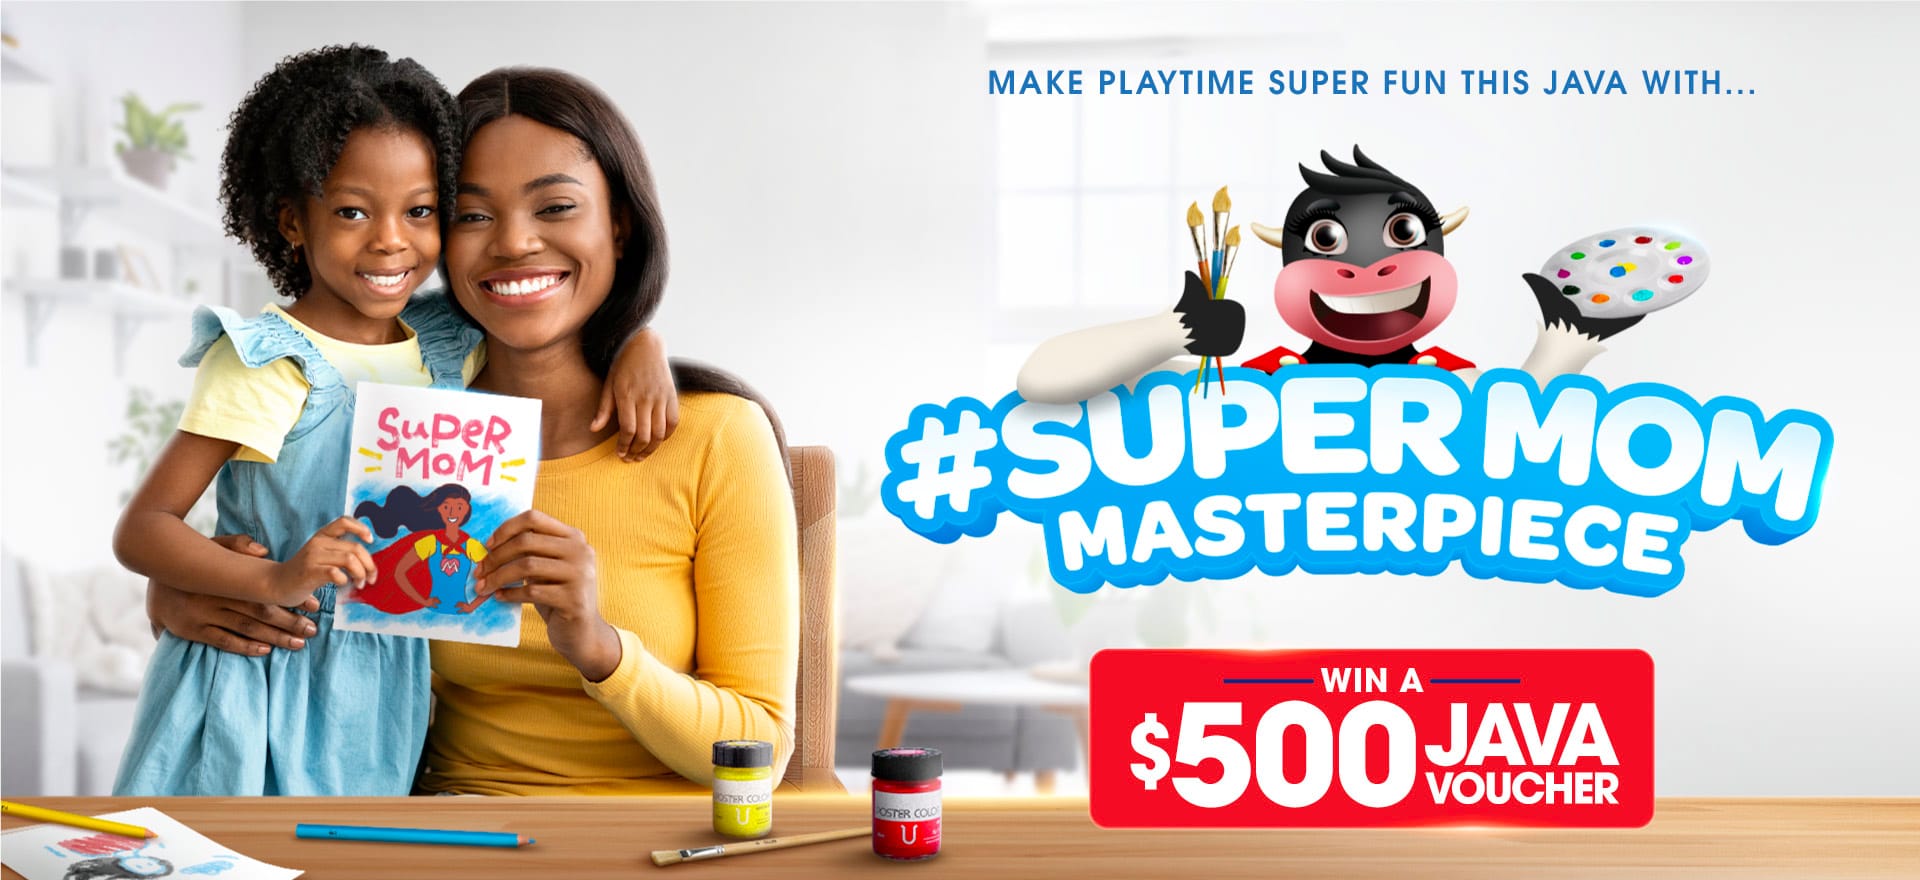 Make playtime super fun this Java with... #SuperMomMasterpiece - Win a $500 Java Voucher